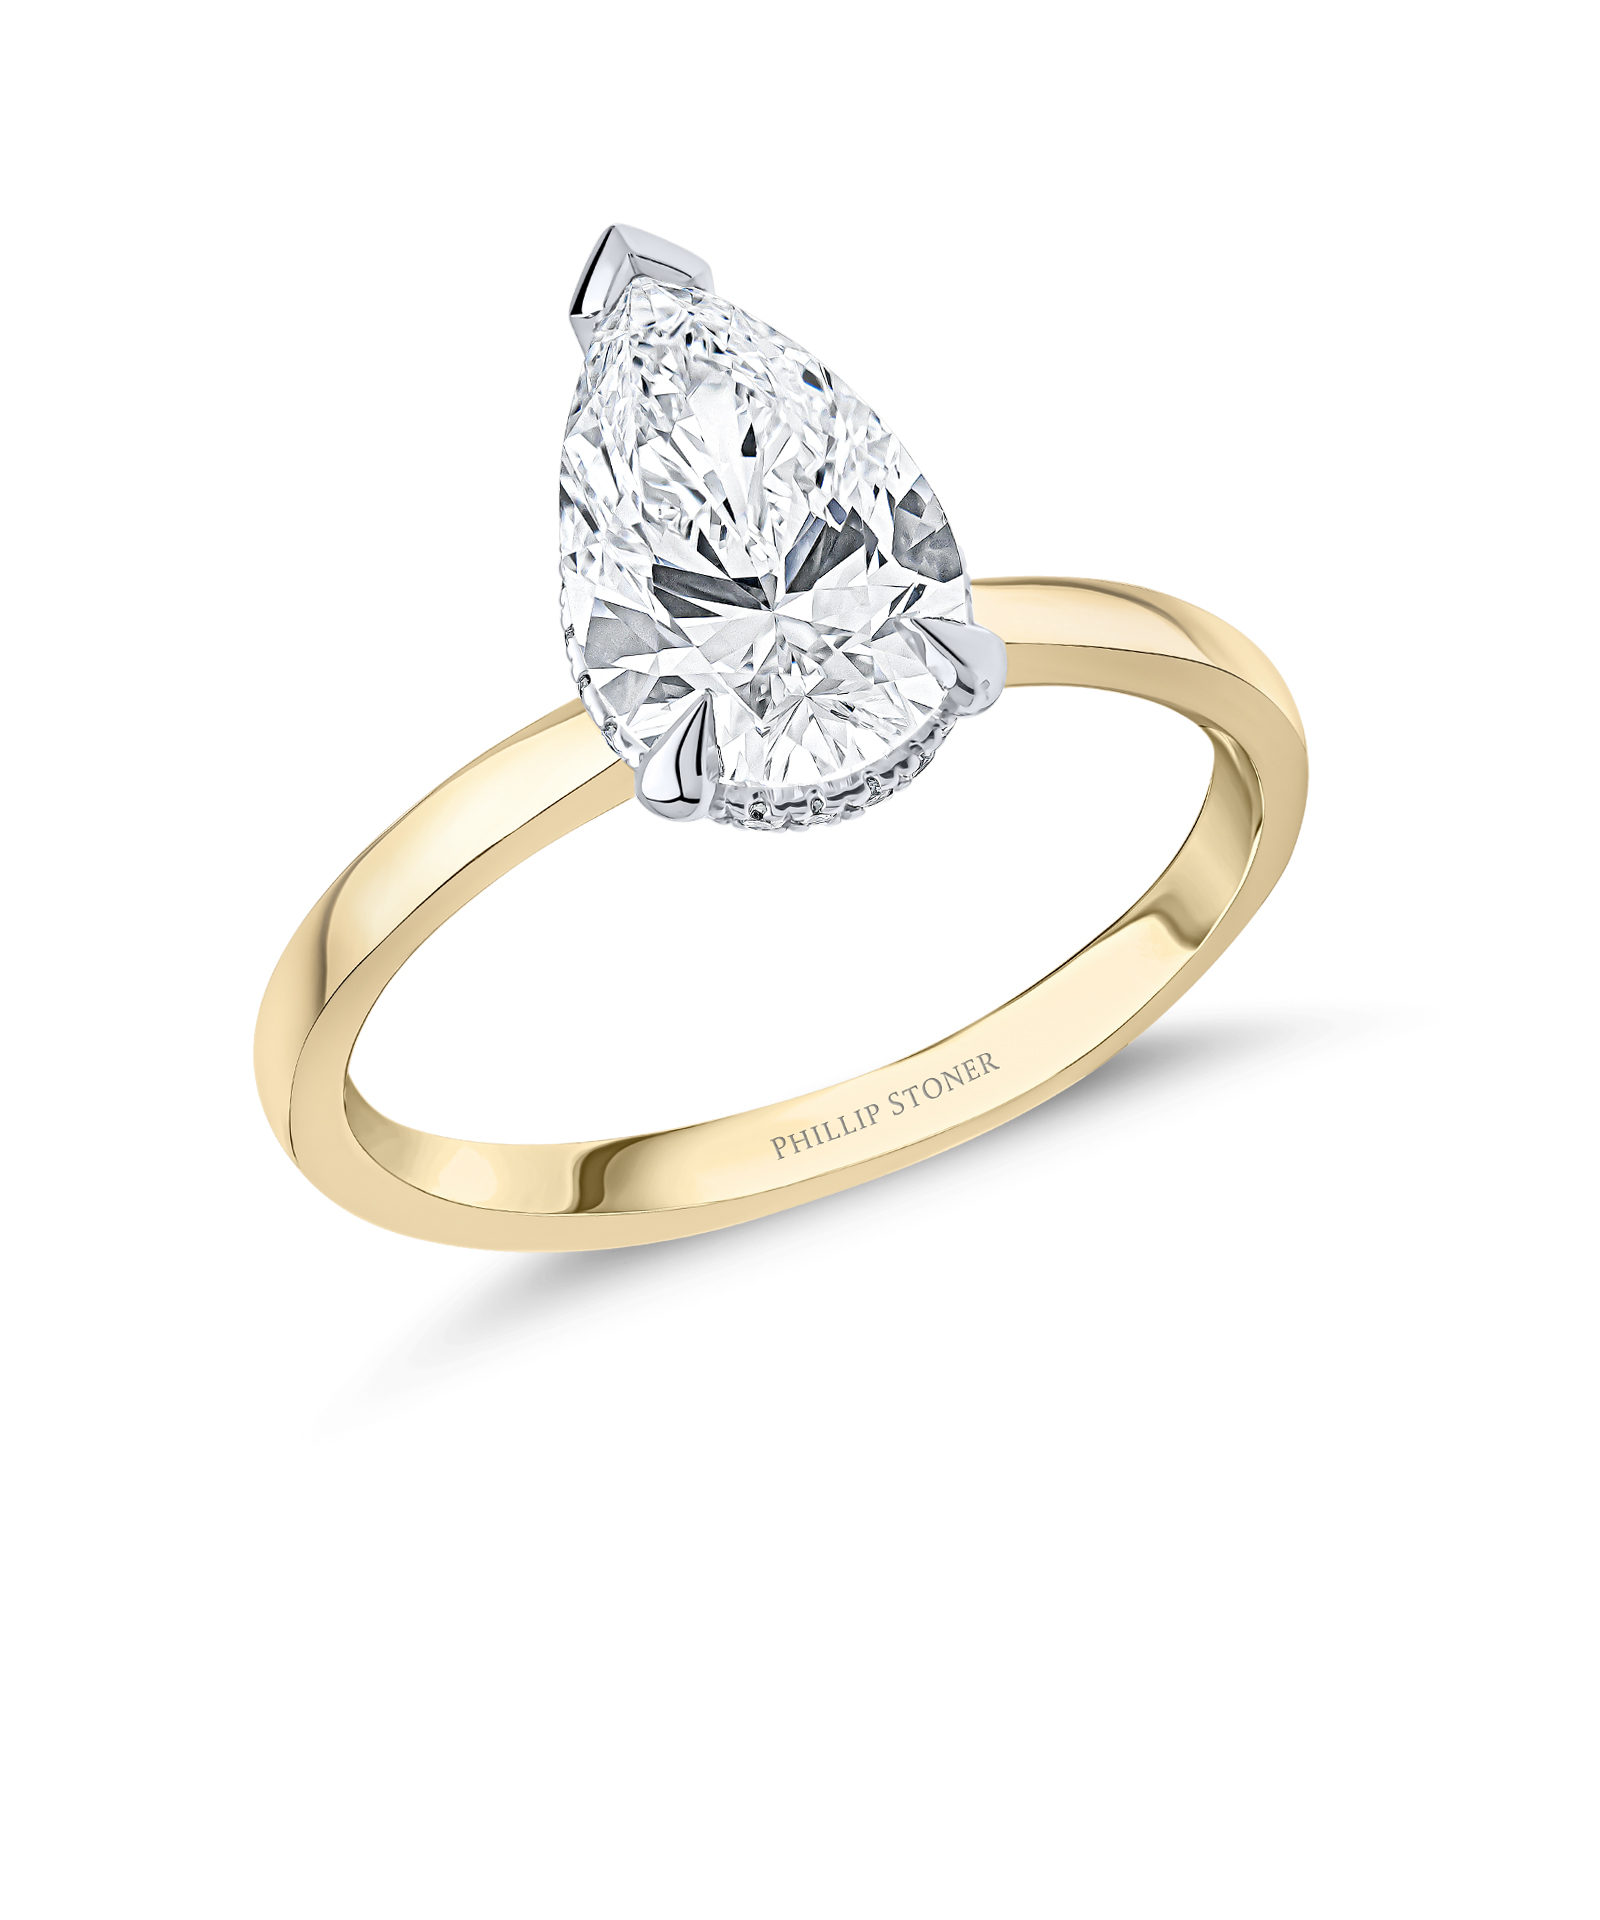 18ct Yellow Gold 1.5ct Pear Cut Lab Grown Diamond Crown Ring - Phillip Stoner The Jeweller